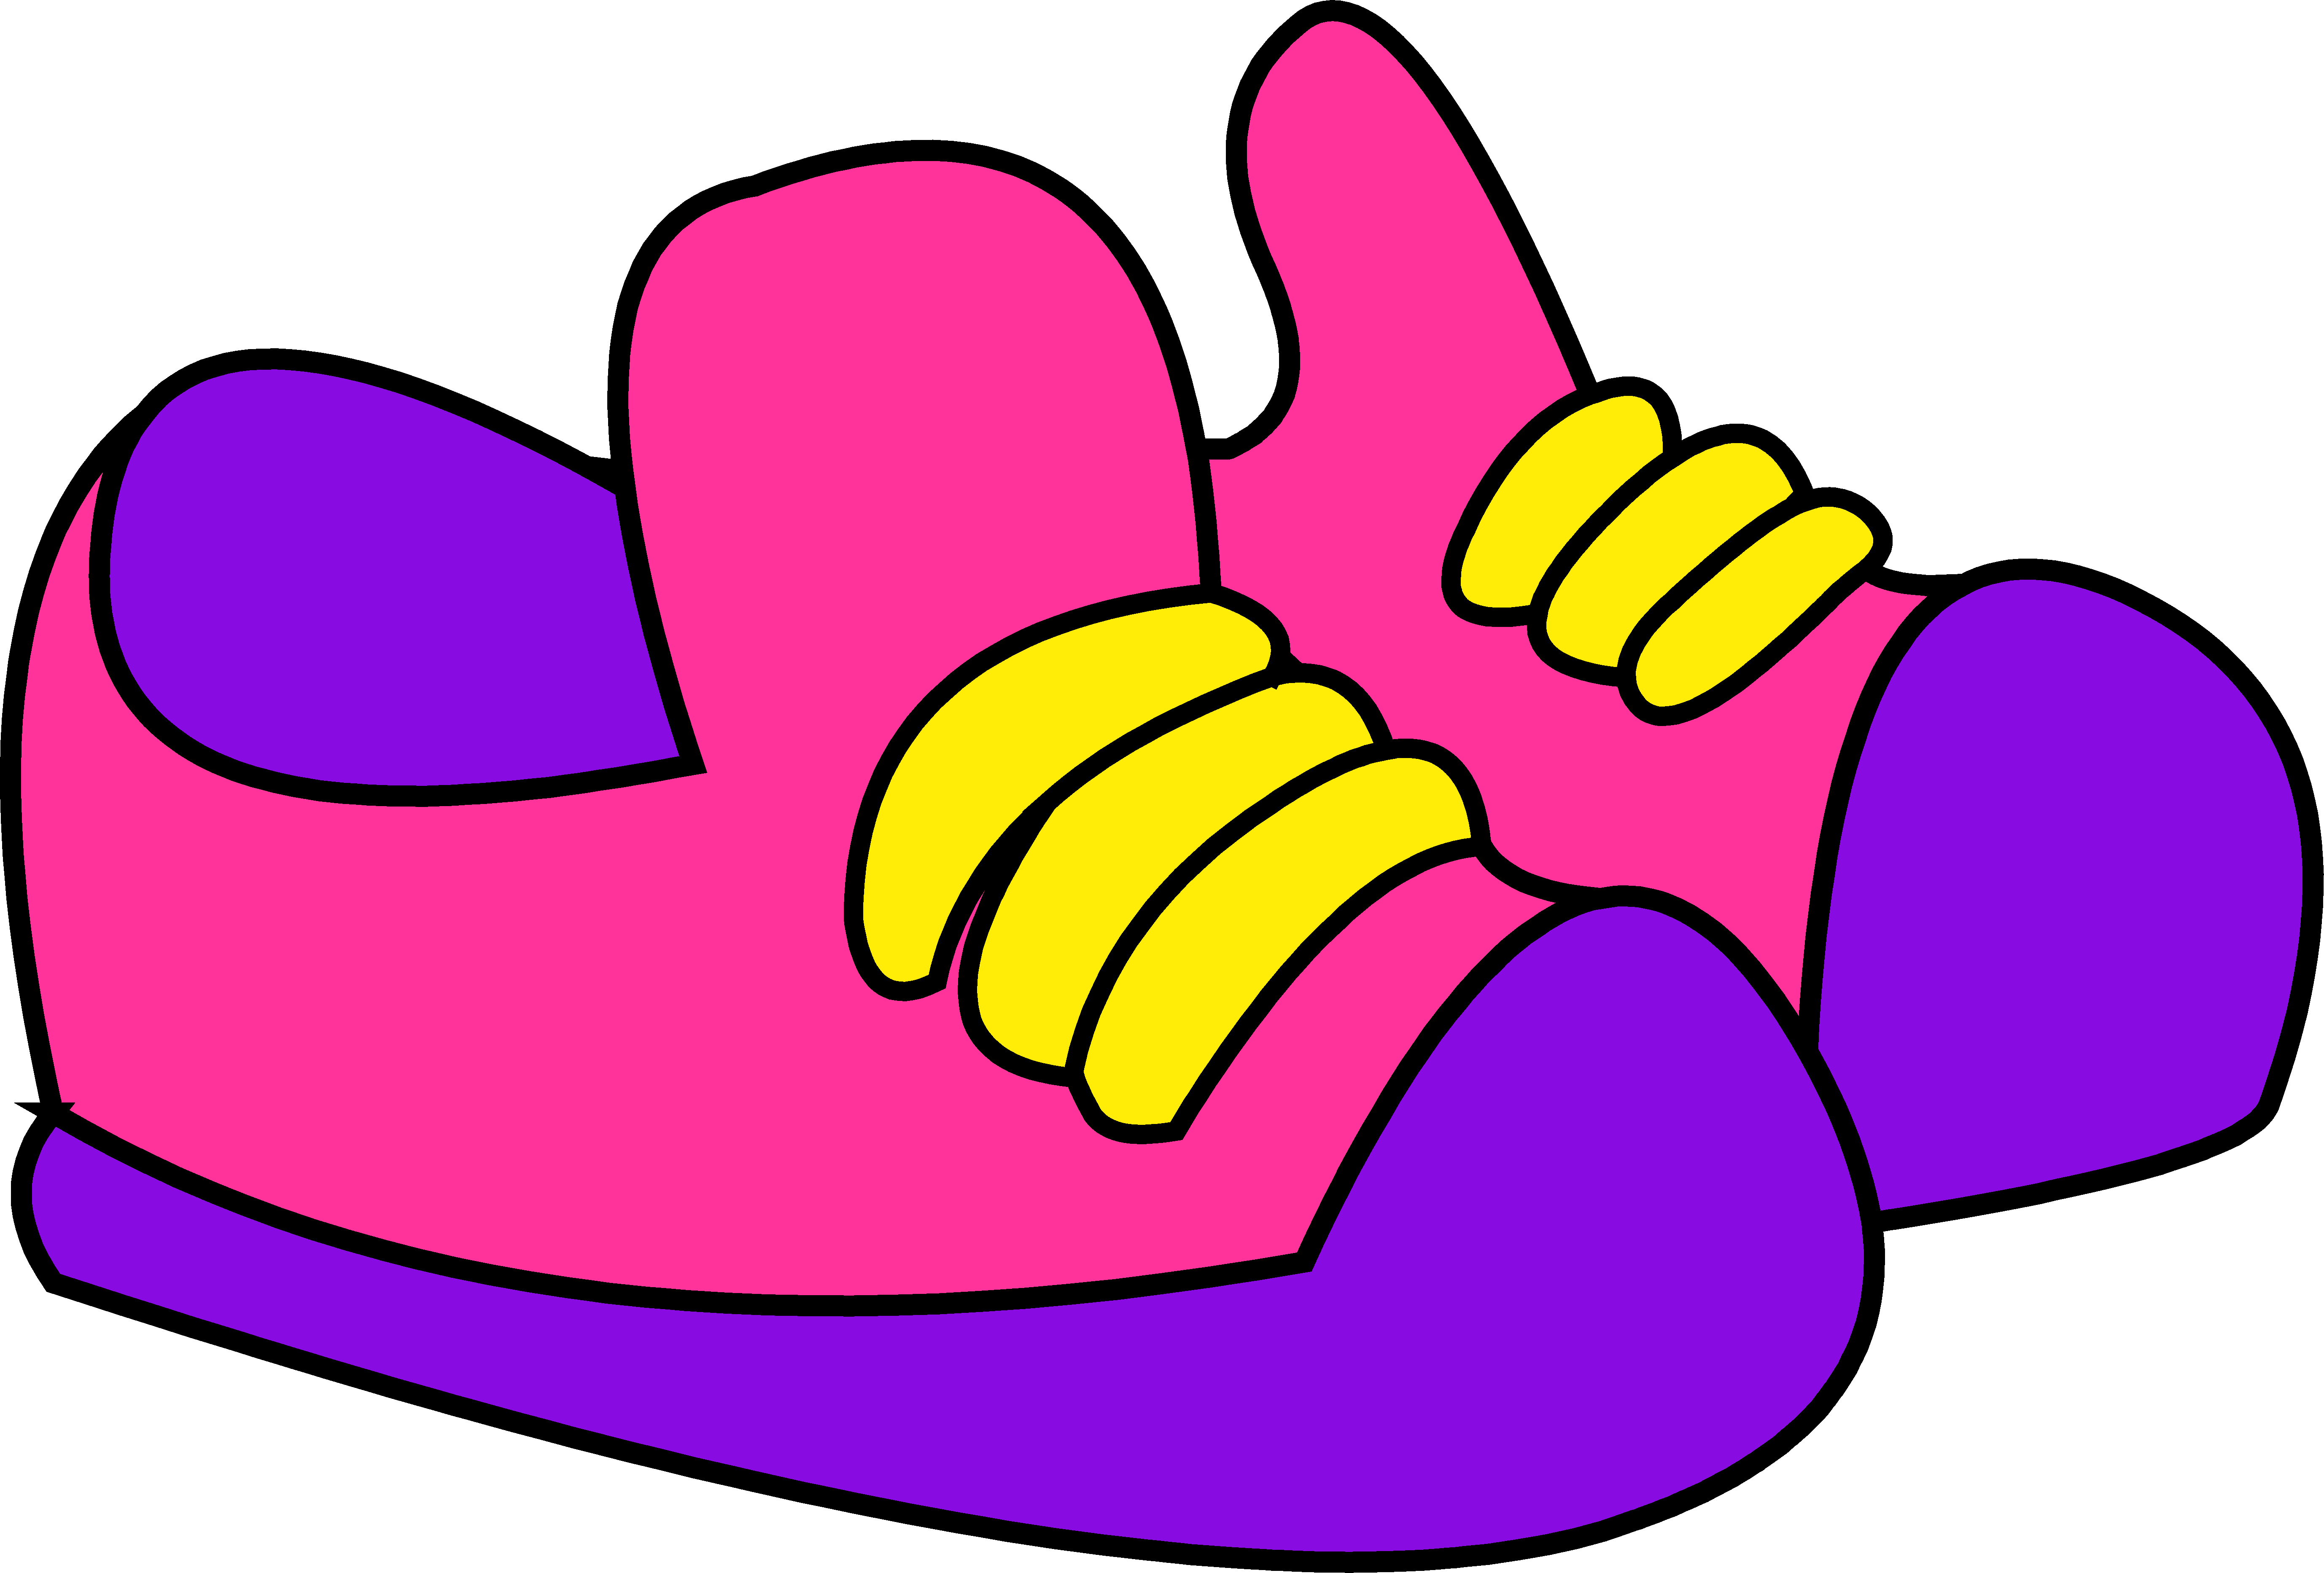 Clip Arts Related To : shoes clip art. view all Cartoon Shoes Cliparts). 